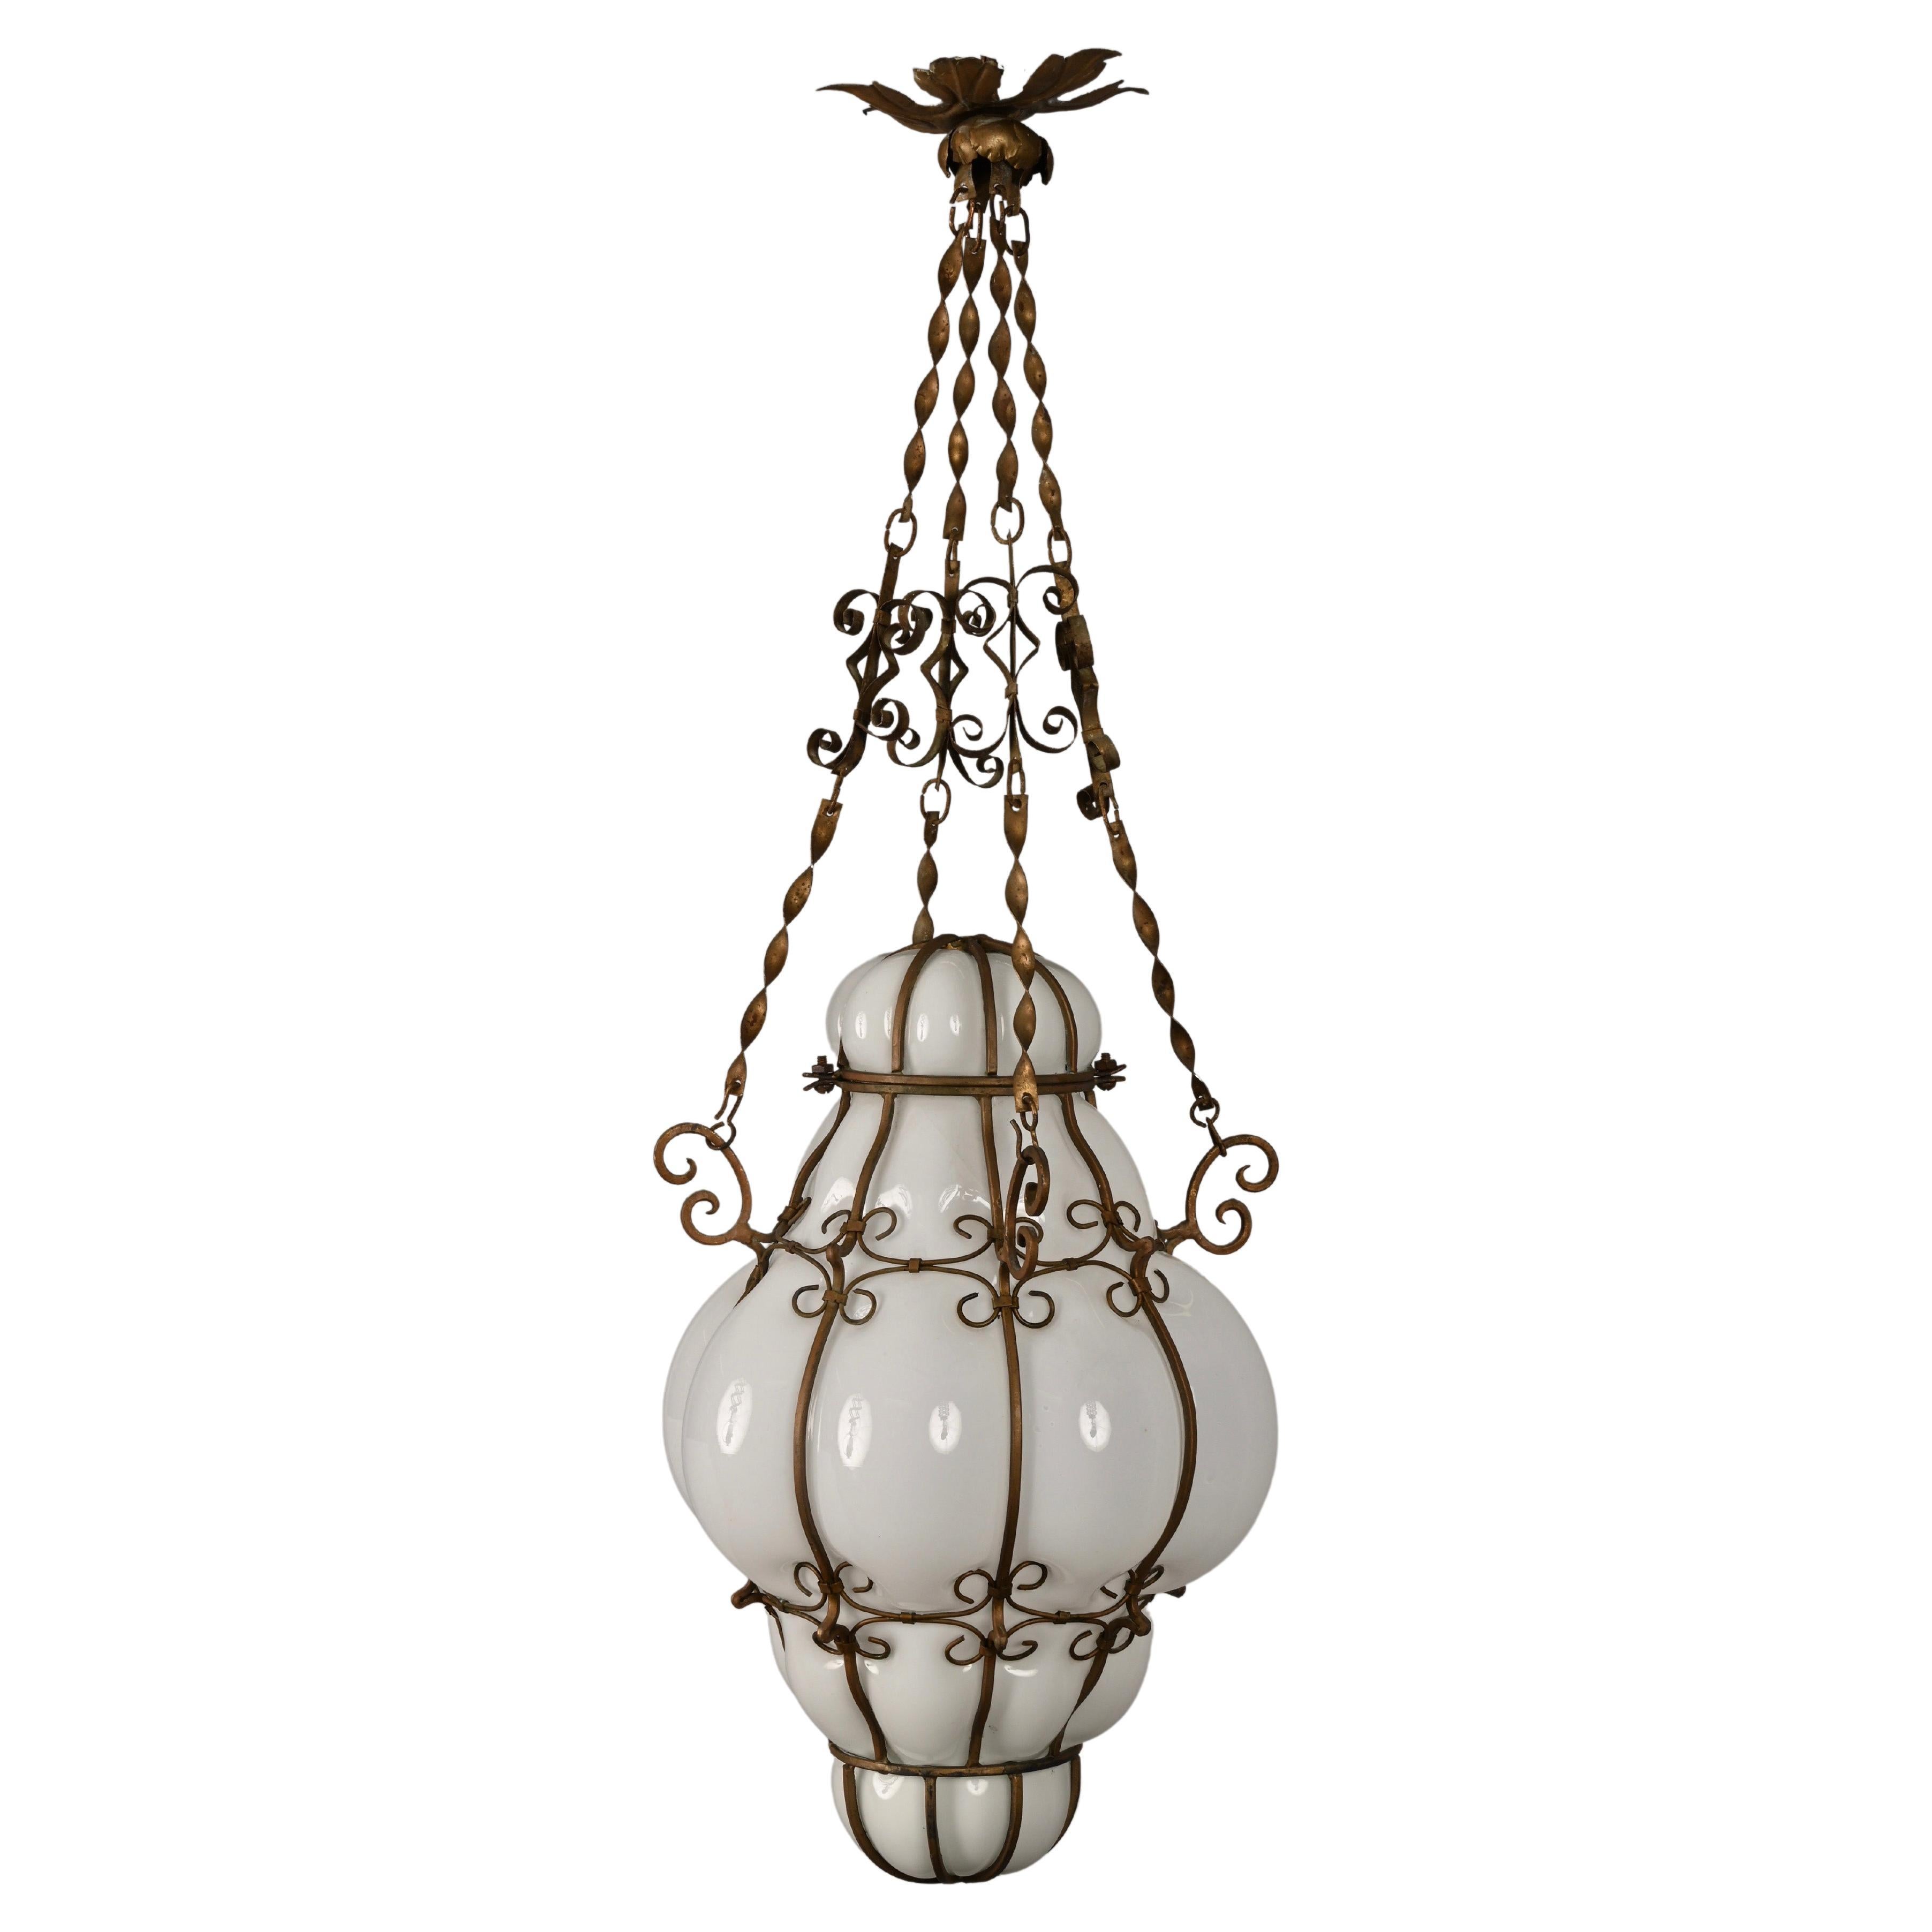 Midcentury Venetian Brass and Mouth Blown Murano White Glass Chandelier, 1940s For Sale